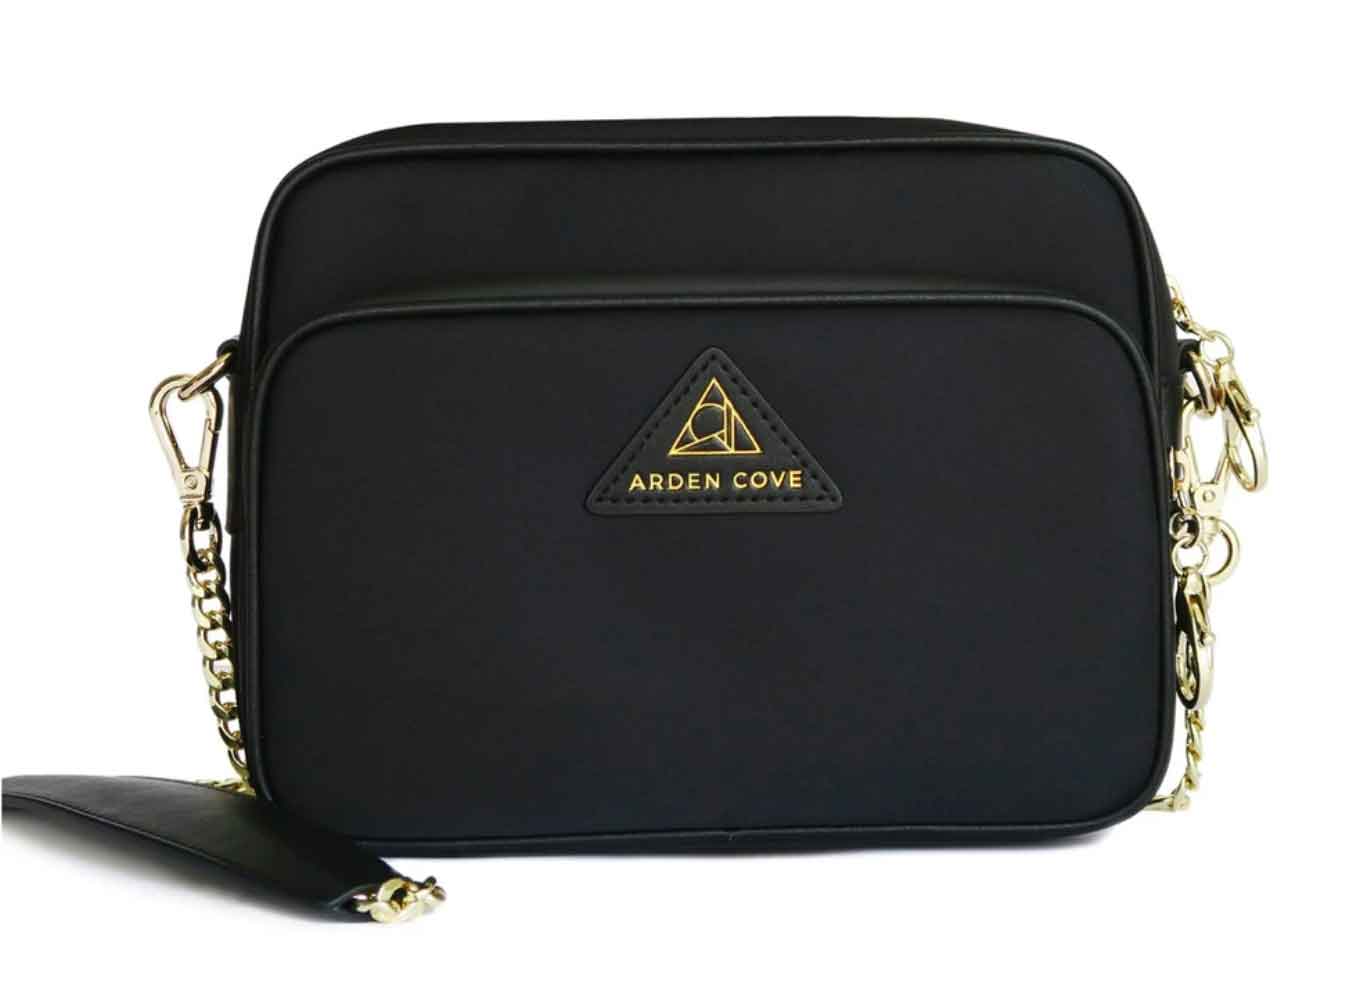 Arden Cove Crossbody Anti Theft Bag for Travel in Black